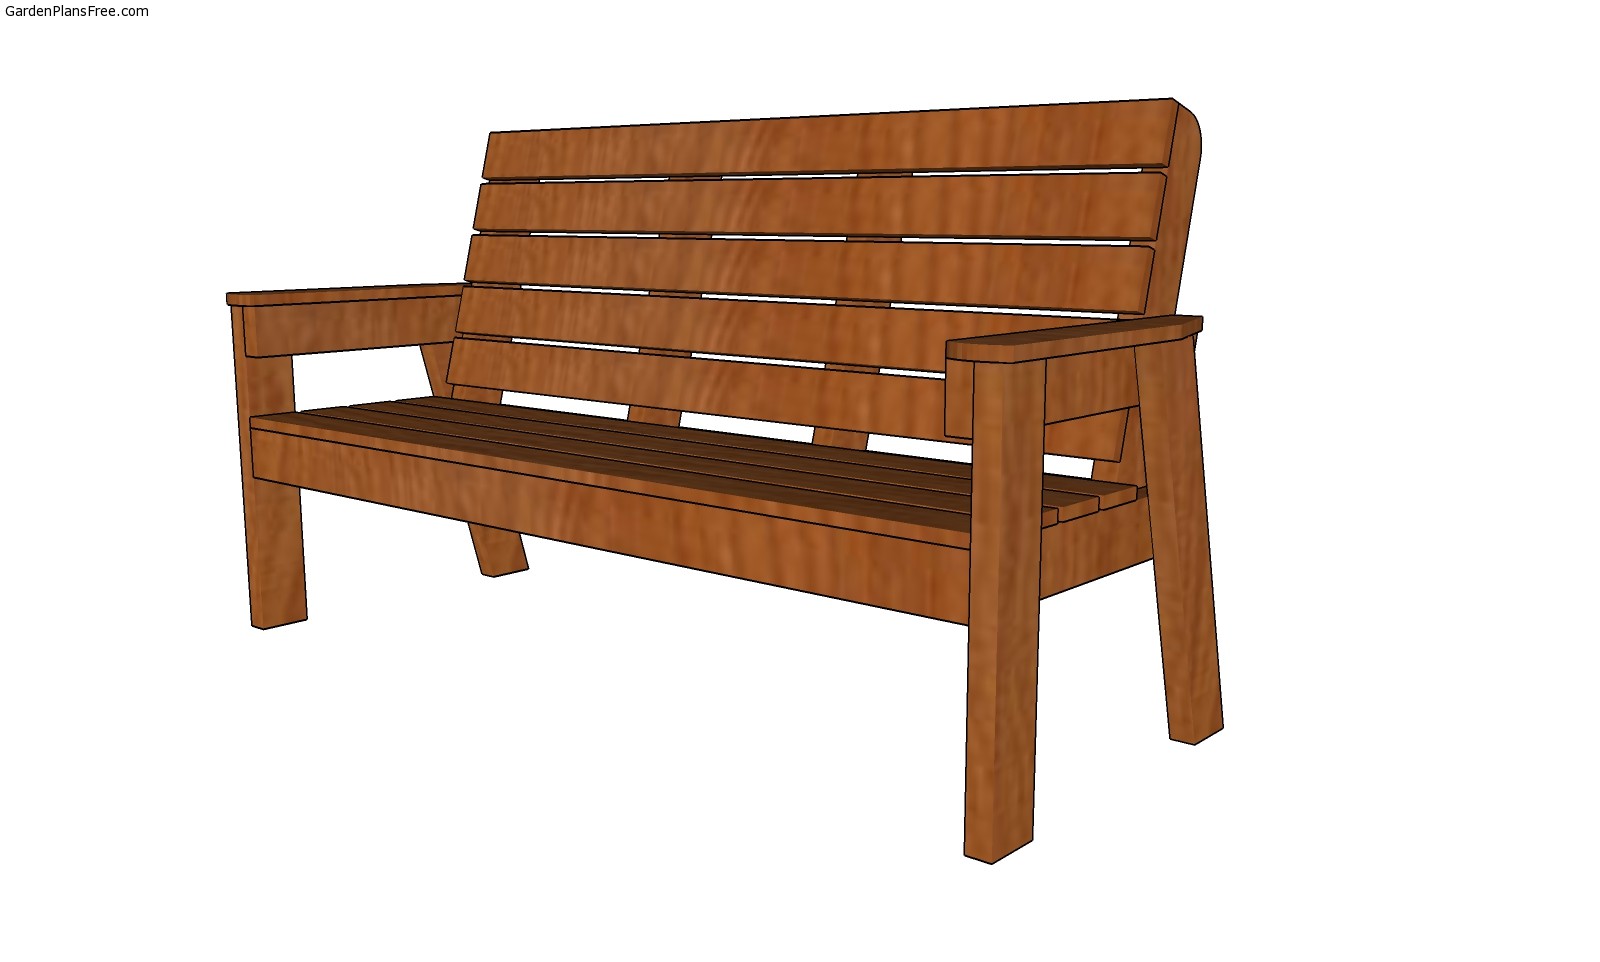 Patio Bench Plans Free Pdf Download Free Garden Plans How To